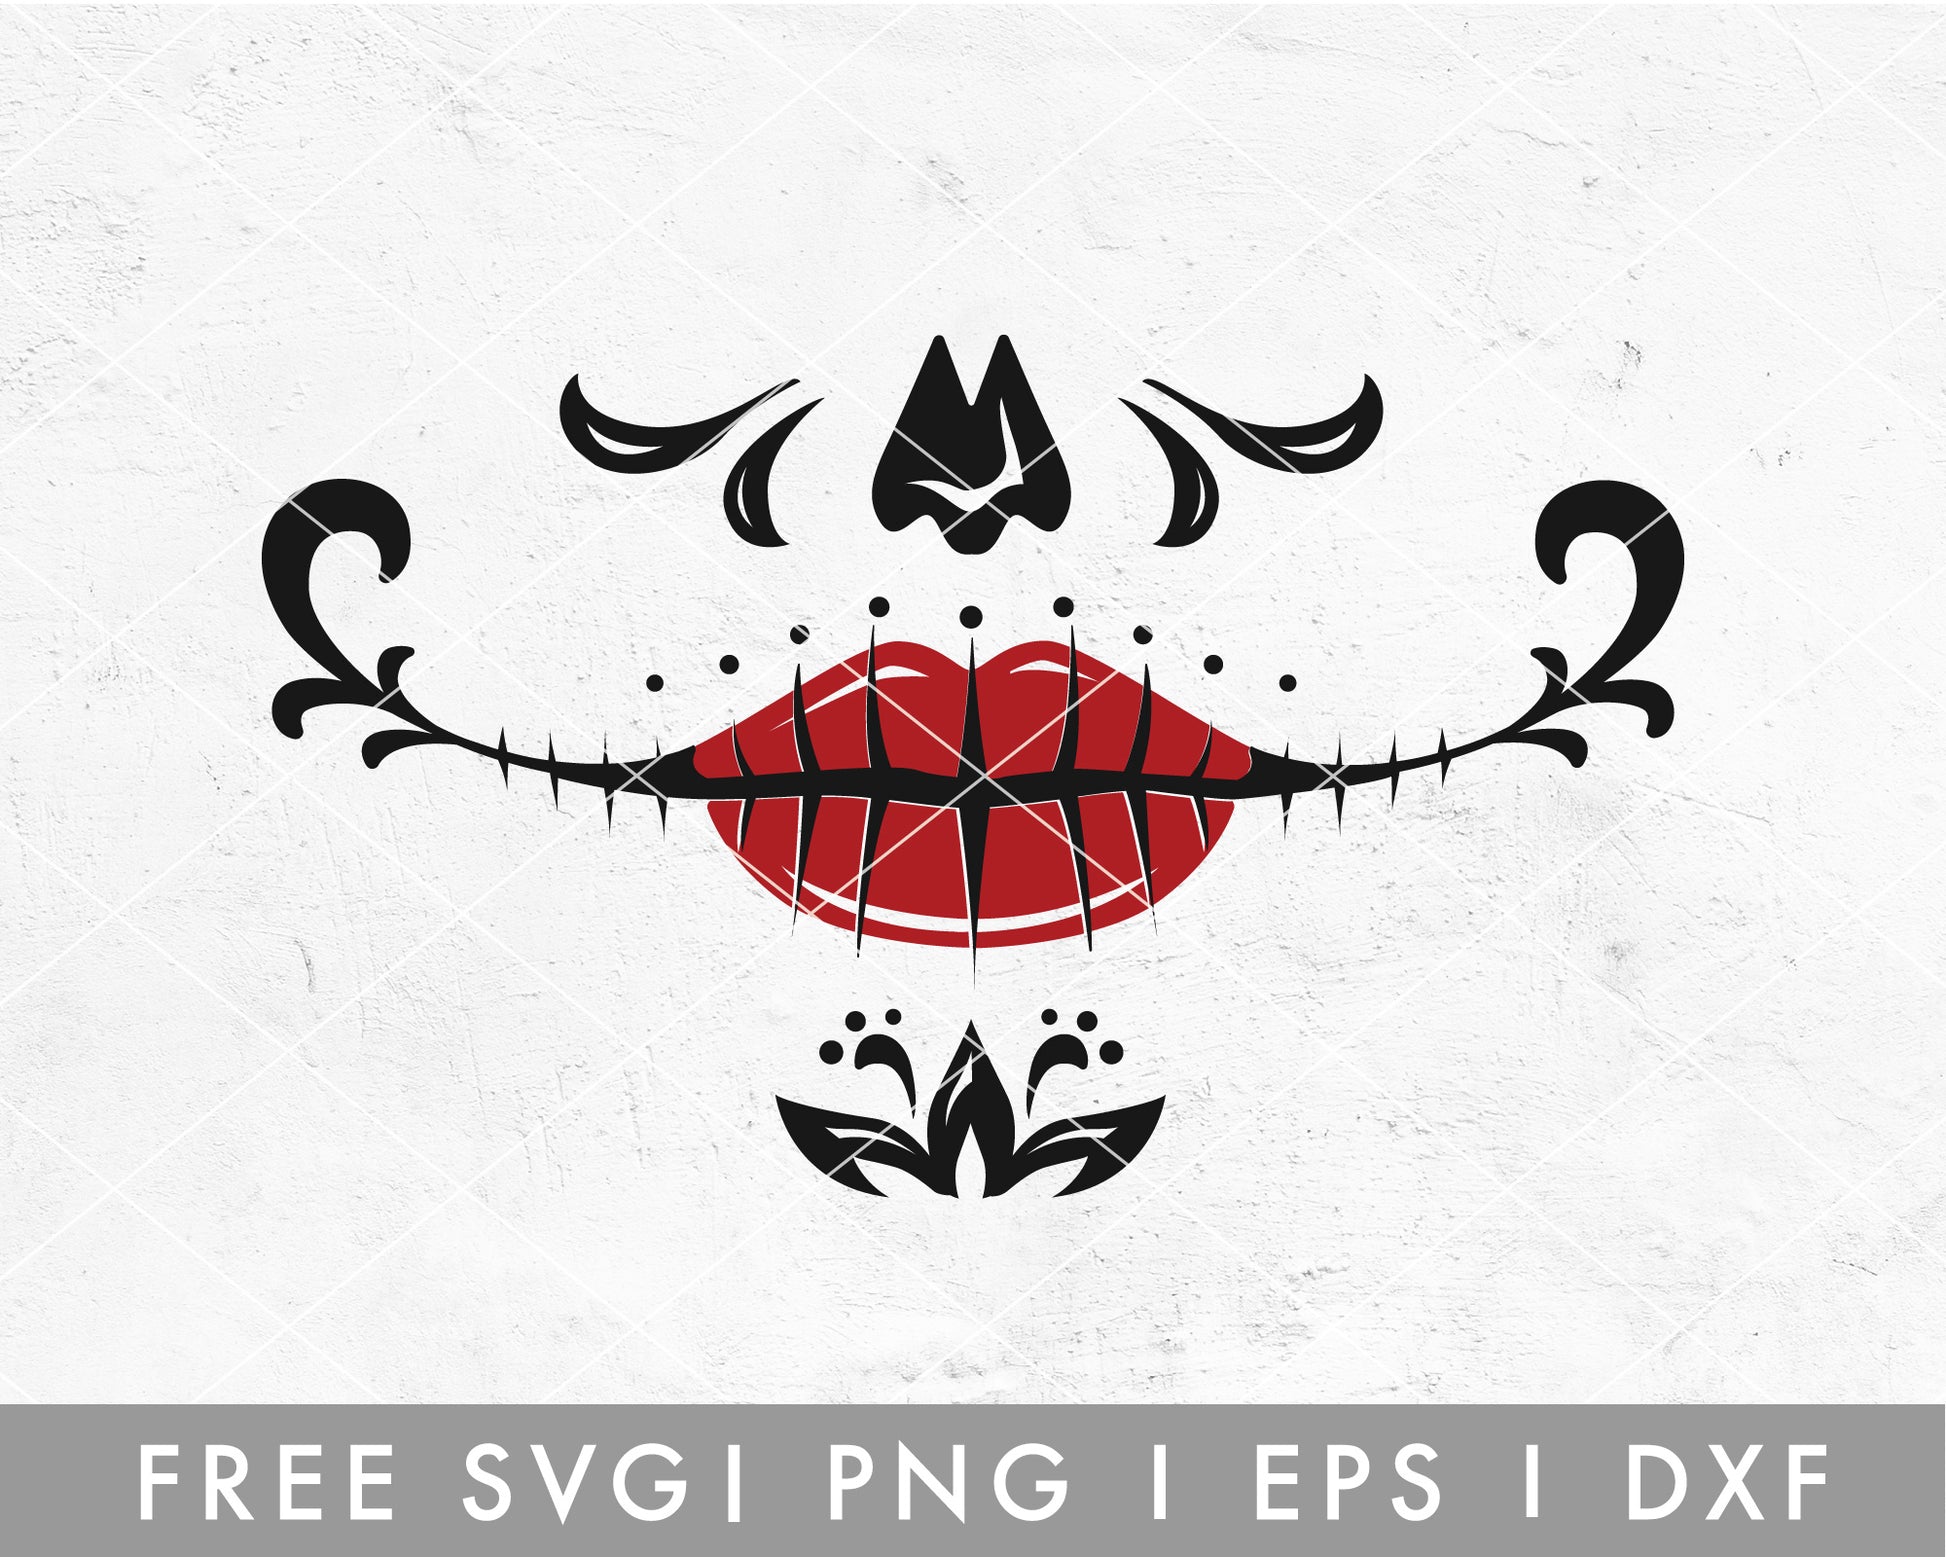 FREE Sugar Skull Mouth SVG Cut File for Cricut, Cameo Silhouette | Halloween Mask Making SVG Cut File